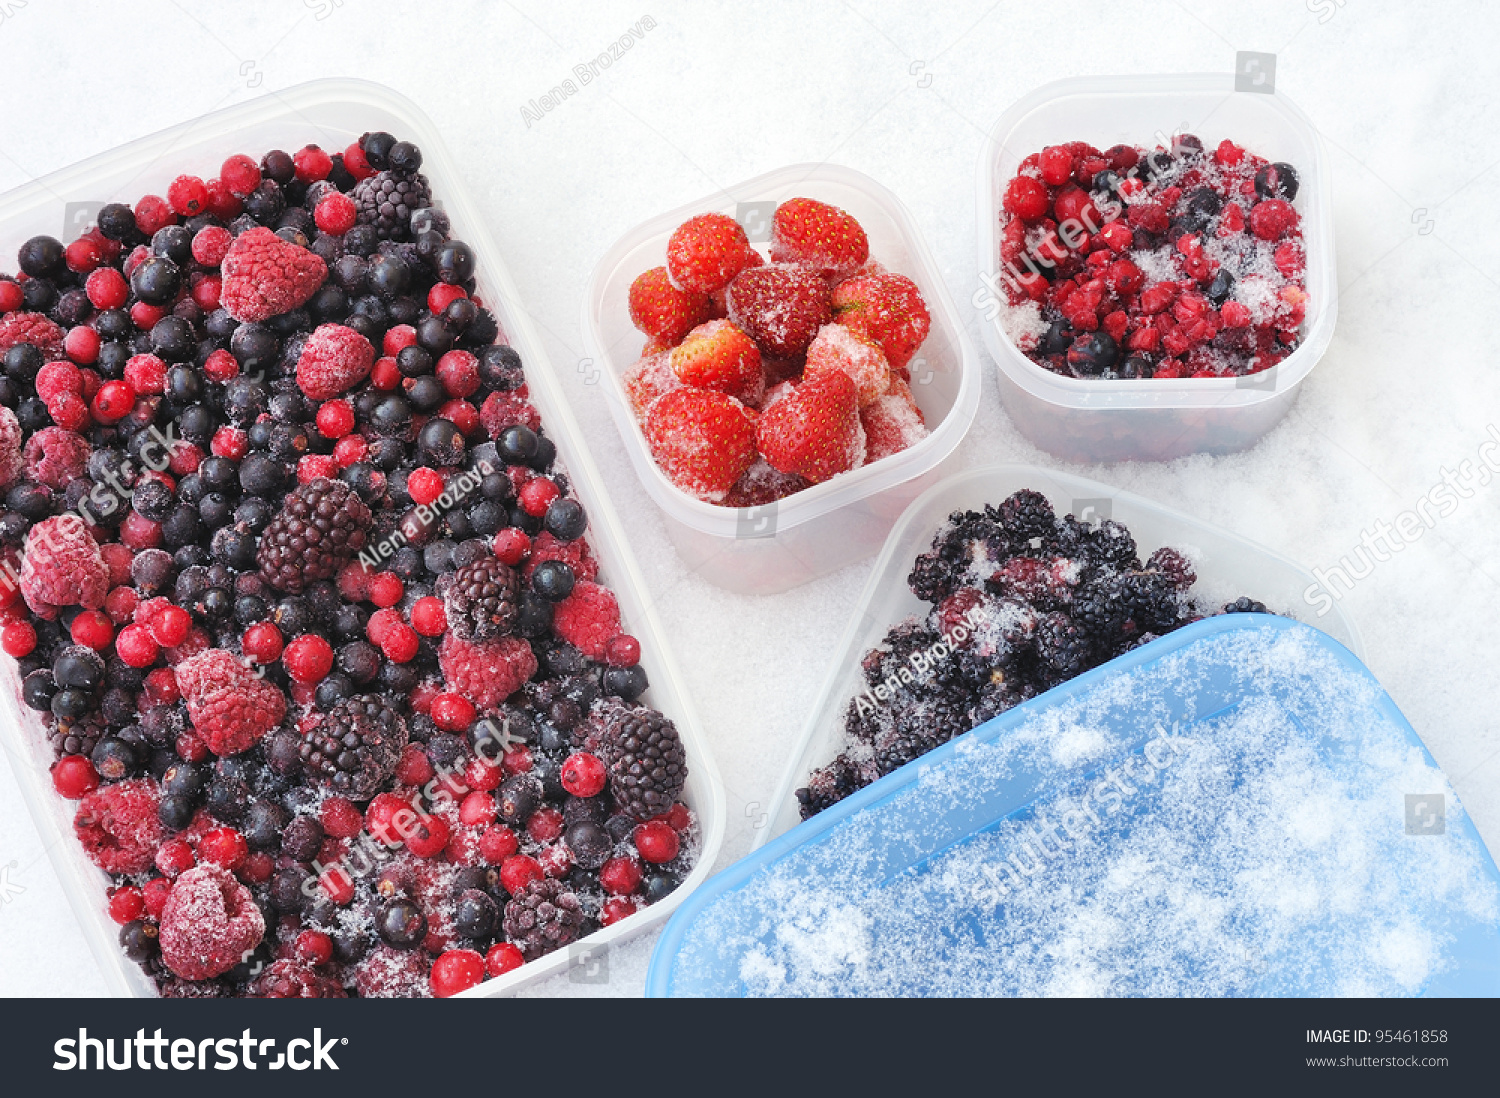 Download Plastic Containers Frozen Mixed Berries Snow Transportation Stock Image 95461858 Yellowimages Mockups